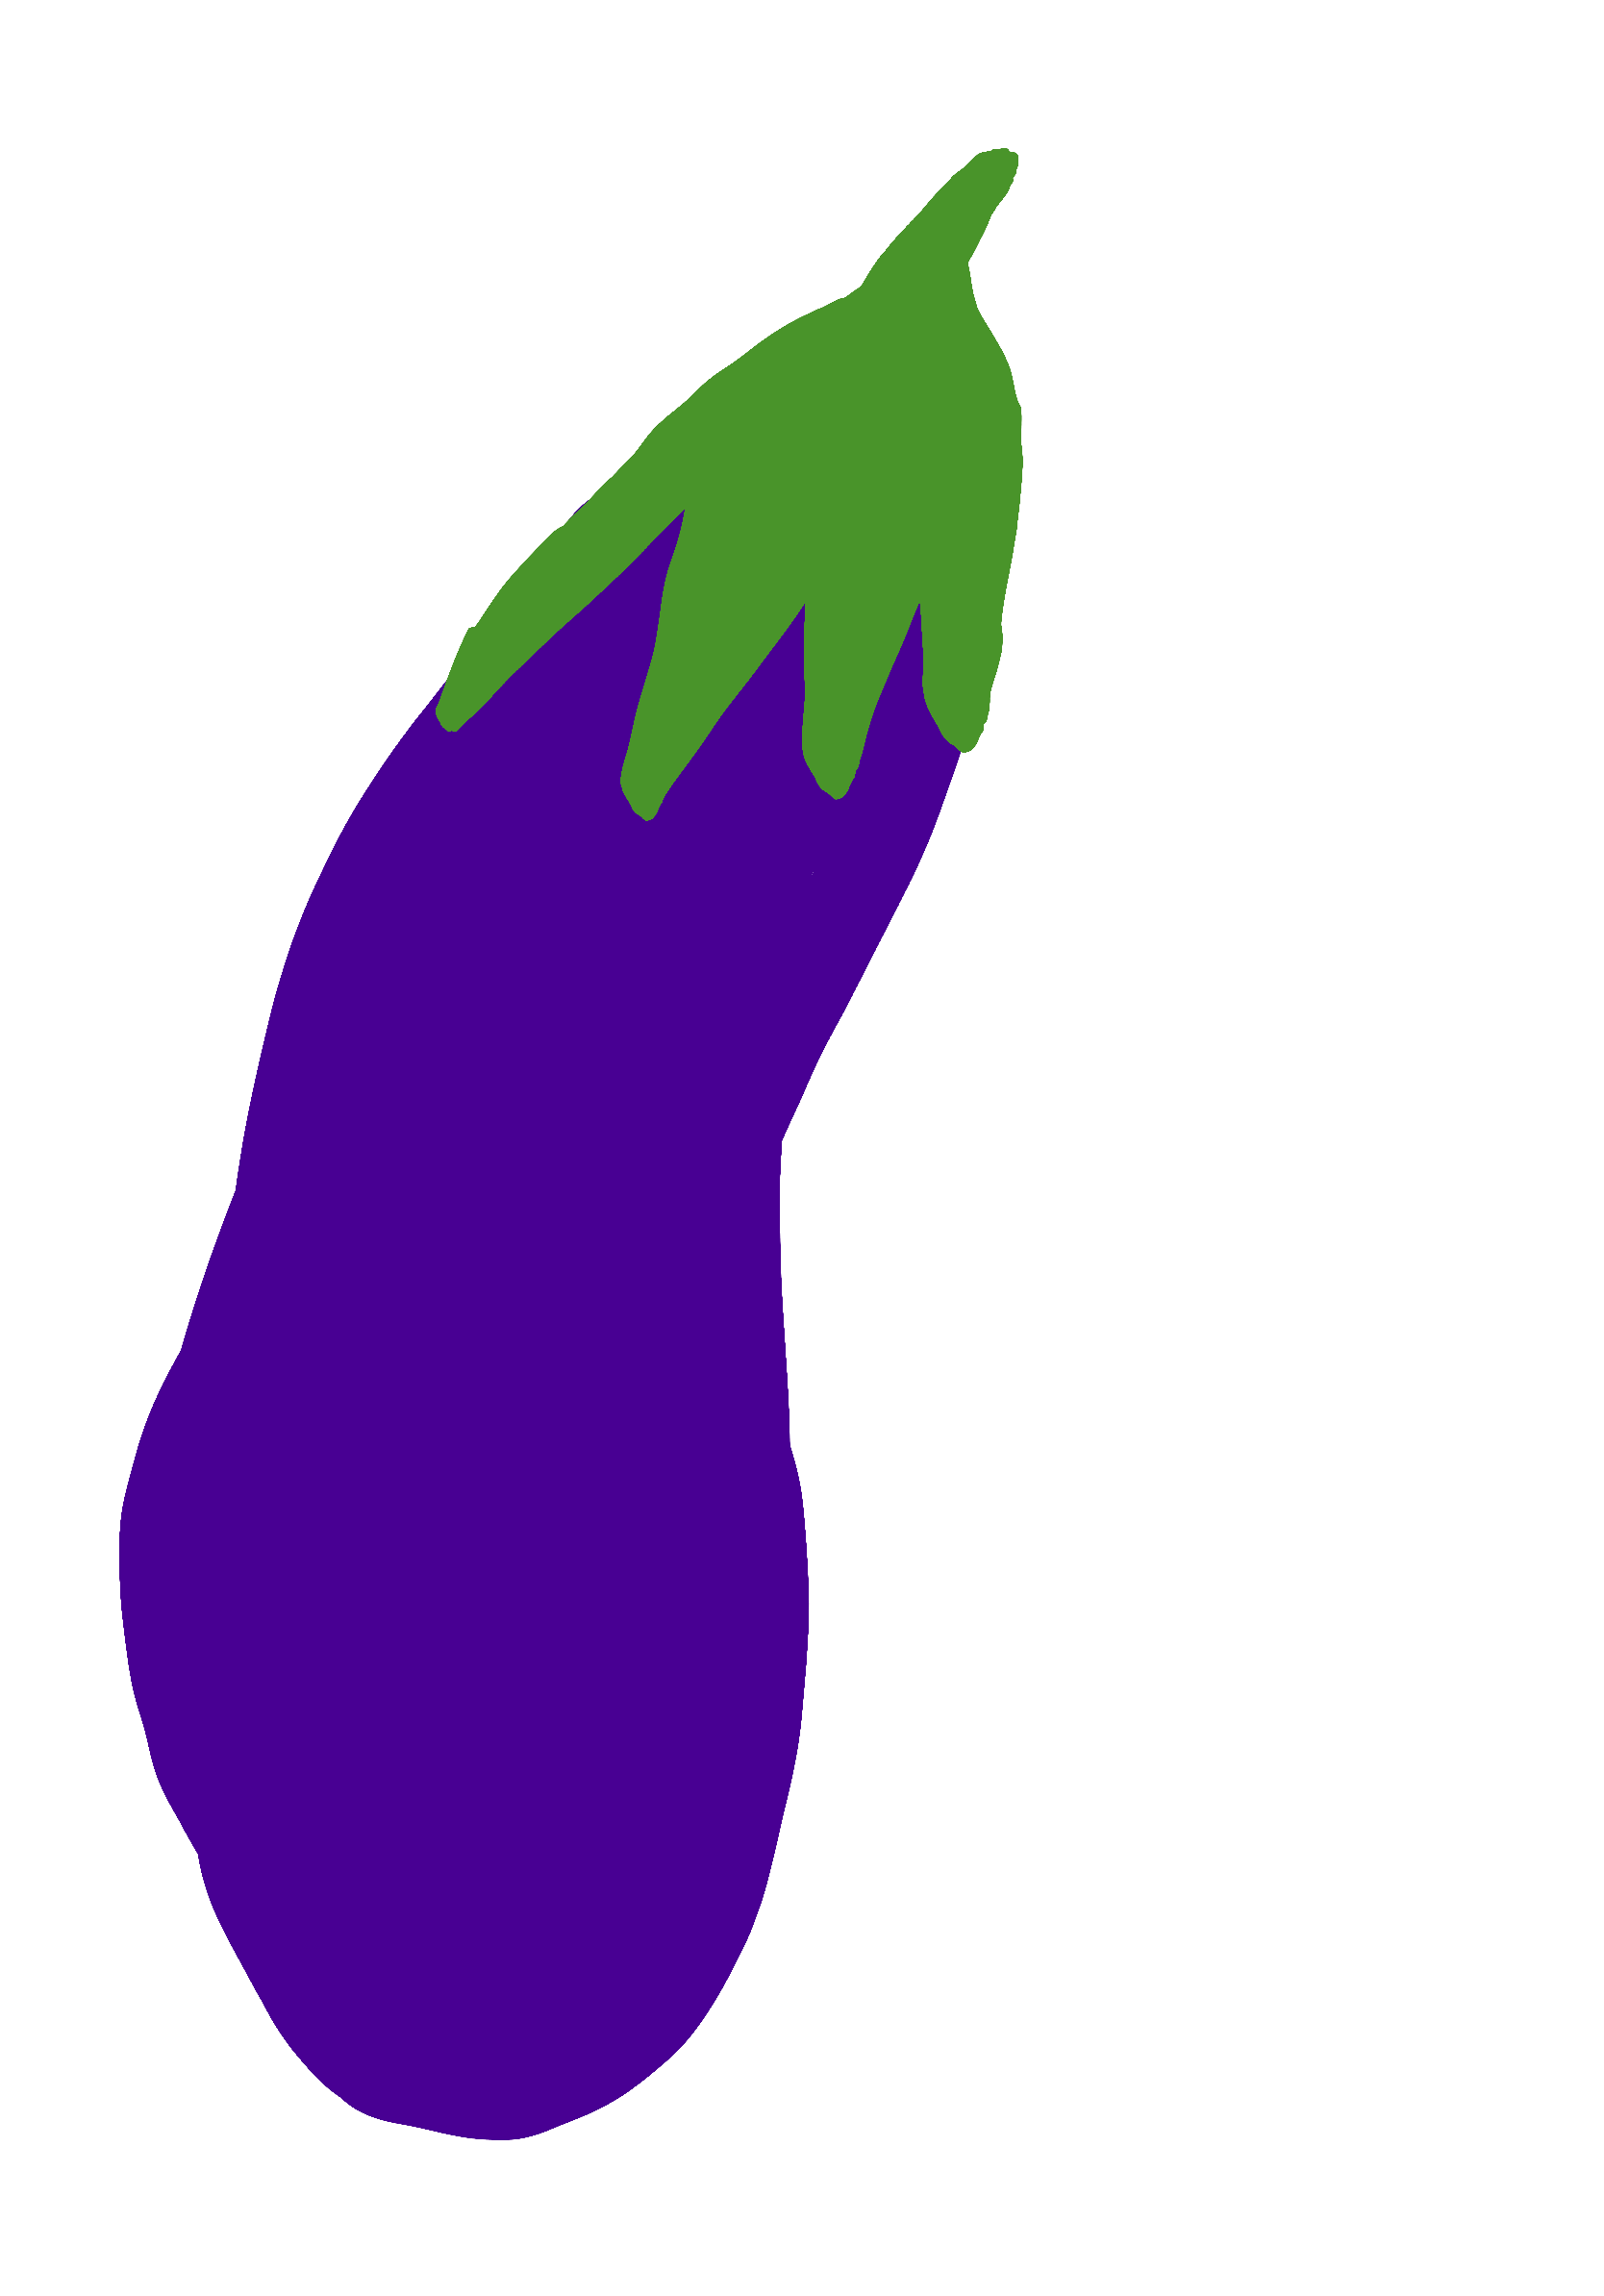 drawing of an eggplant